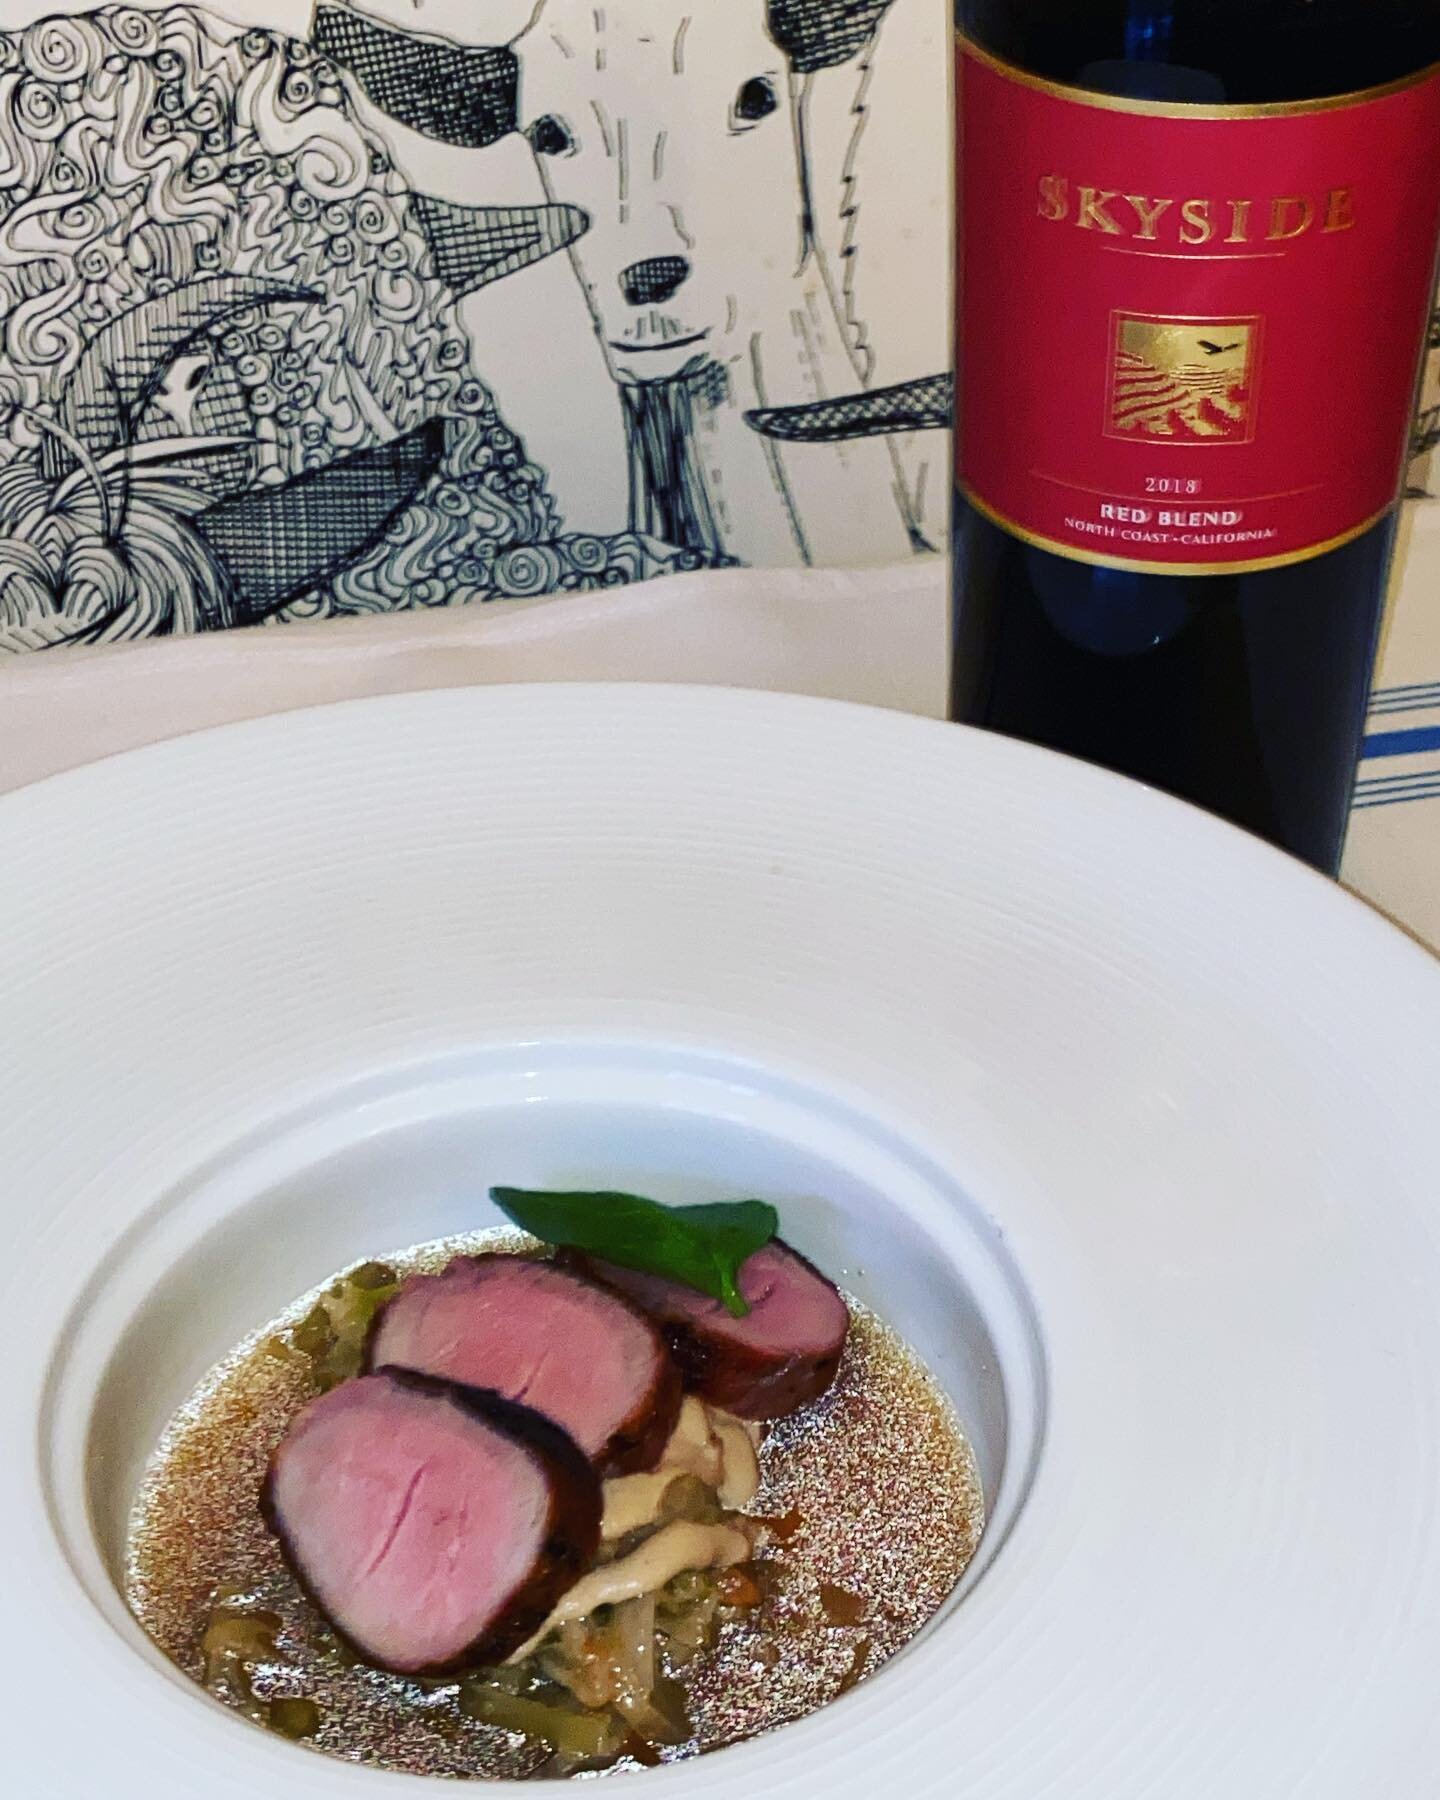 Third Course is Ember Roasted Pork Loin with peanut braised cabbage, mushroom consomm&eacute; paired with Sky Side, Red Blend, North Coast, CA 2018 #thefrenchgoat #lewisburgwv #bonappalachia #simplygbv #bistrolife @moethennessy